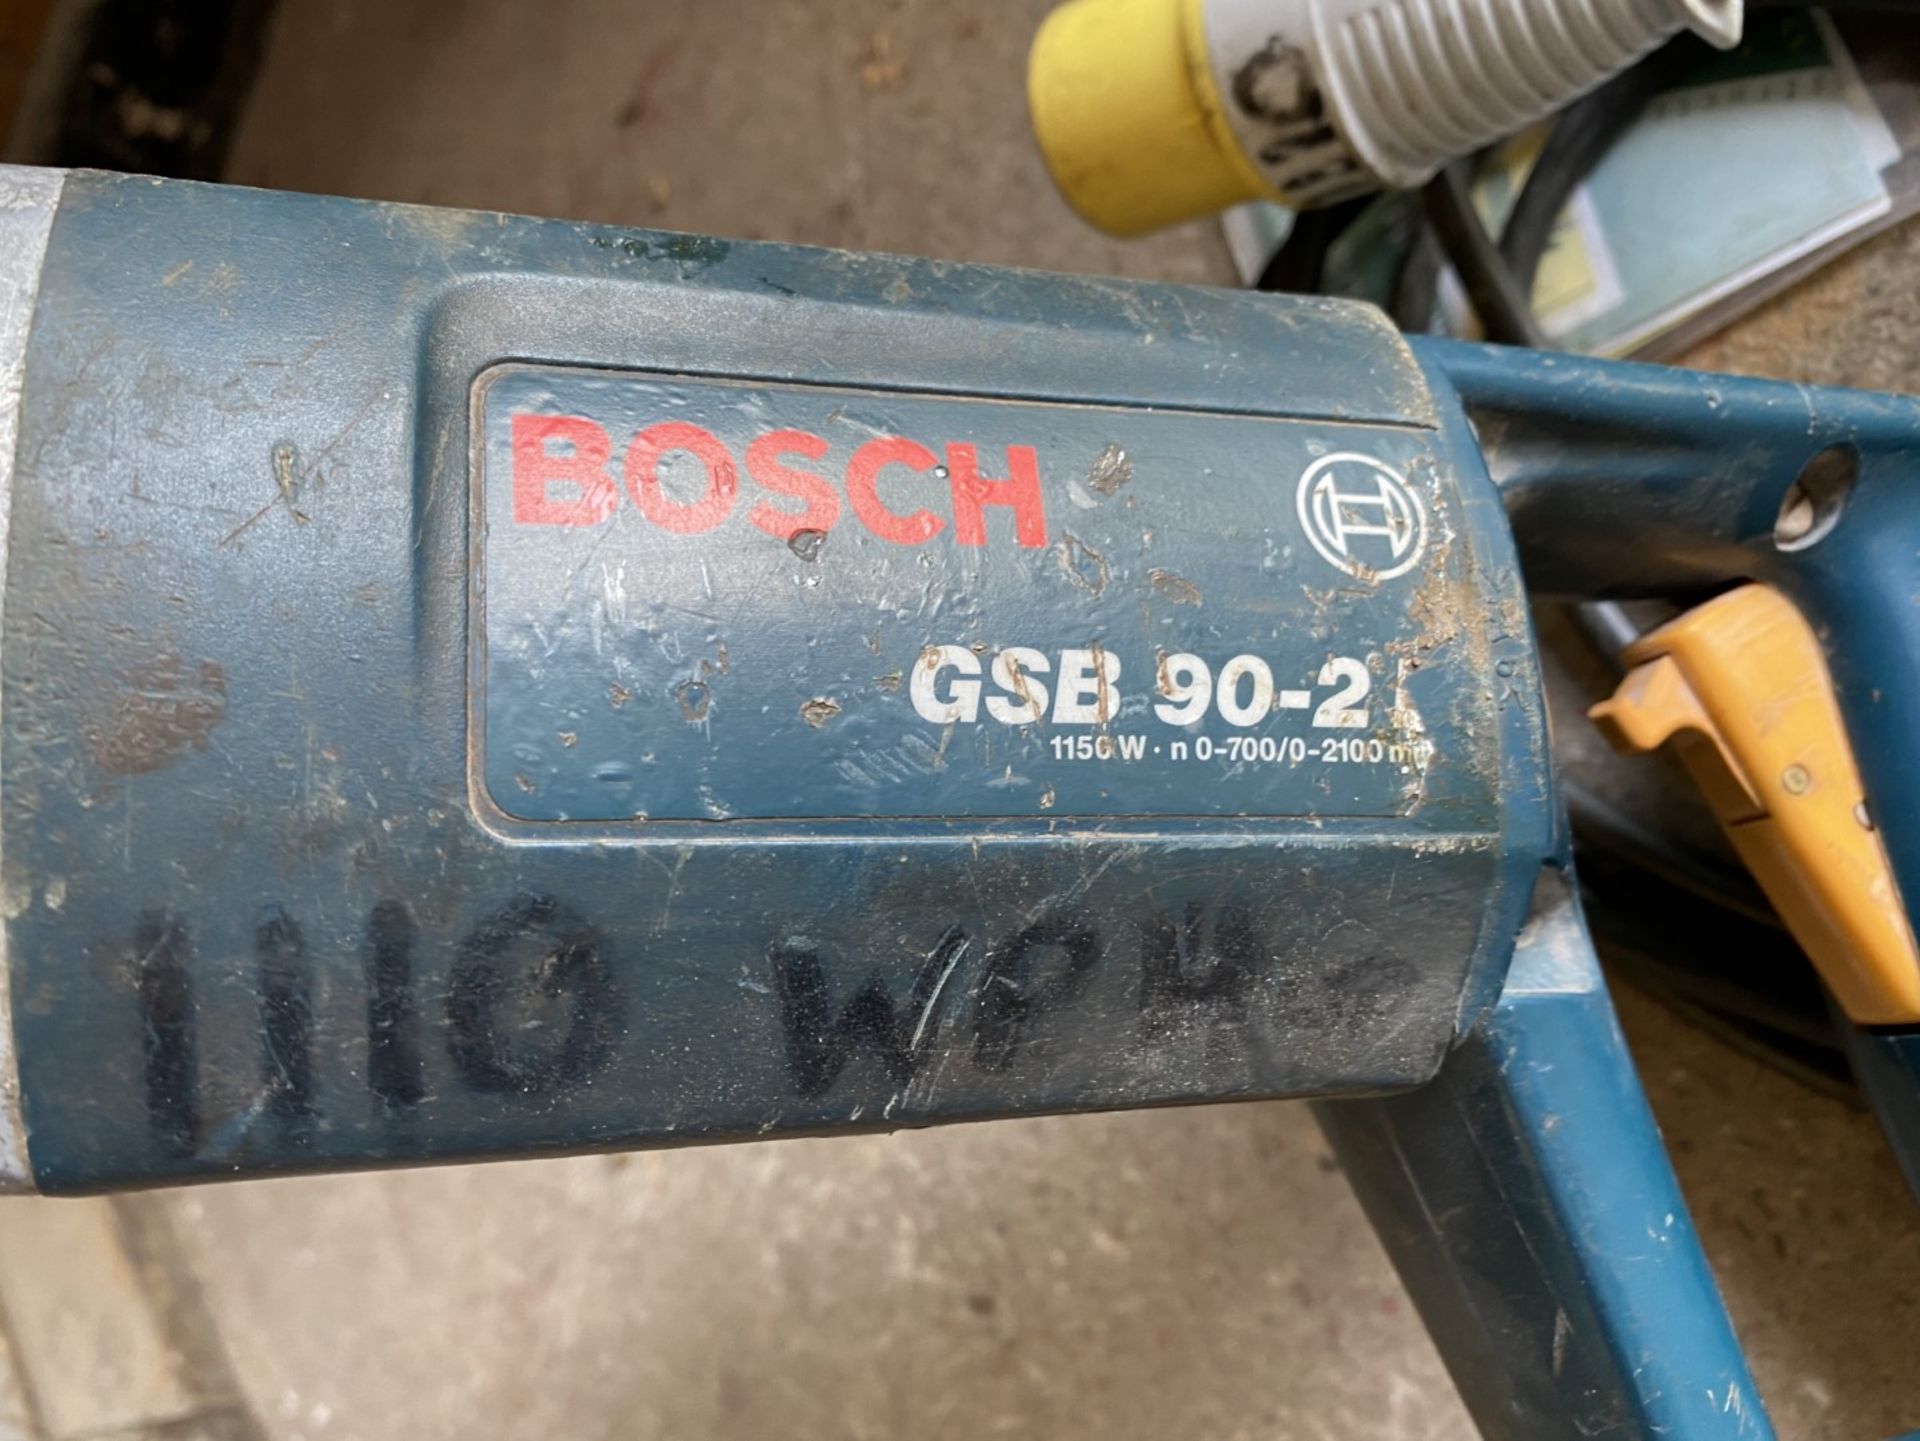 Bosch GSB 90-2E impact drill, 110v - NOT TESTED - Image 3 of 5